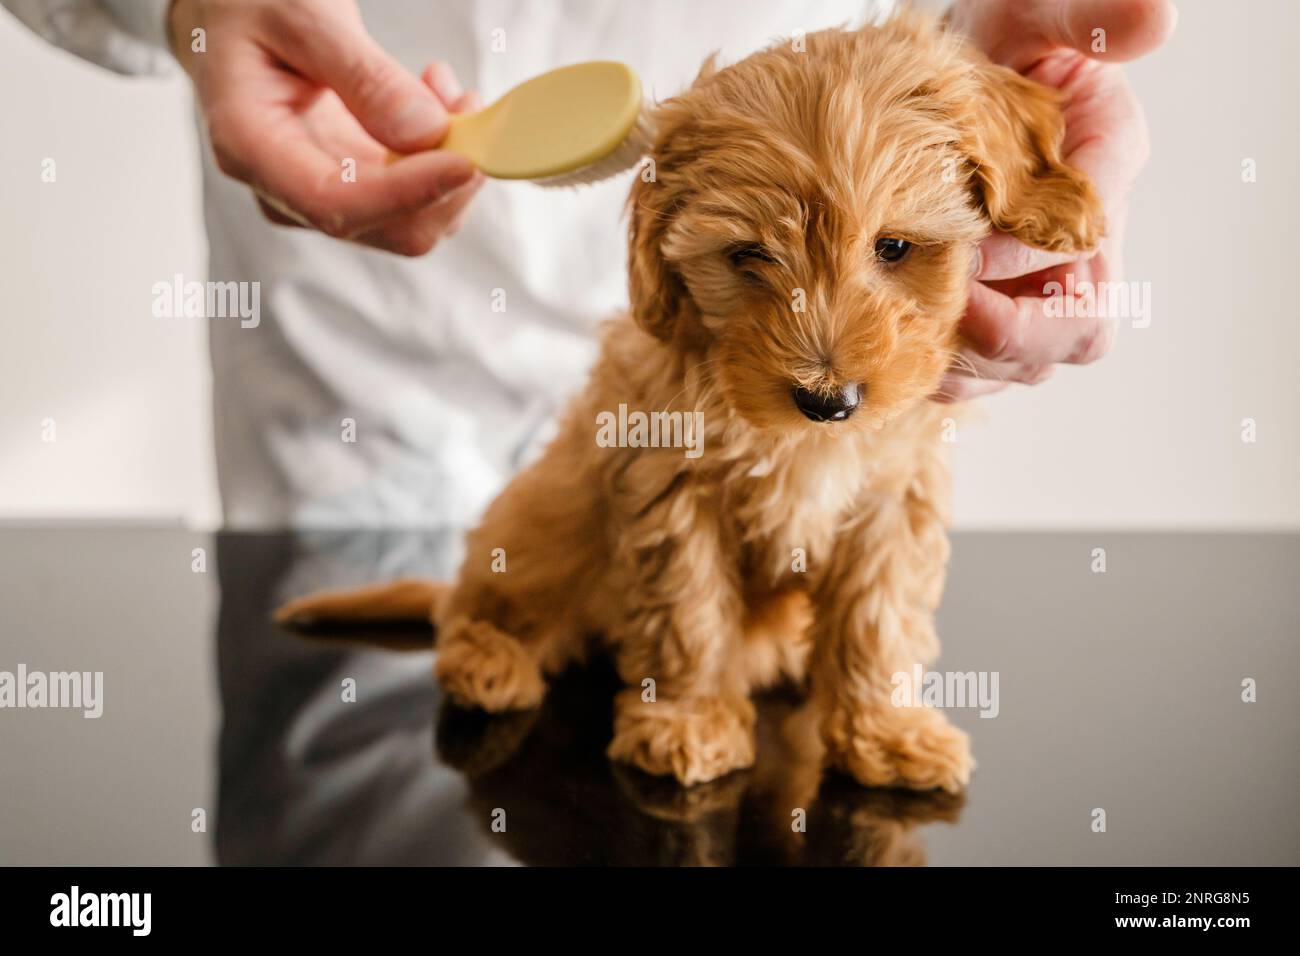 Brushing a Maltipoo puppy. Caring for the coat of a maltipu dog. Stock Photo